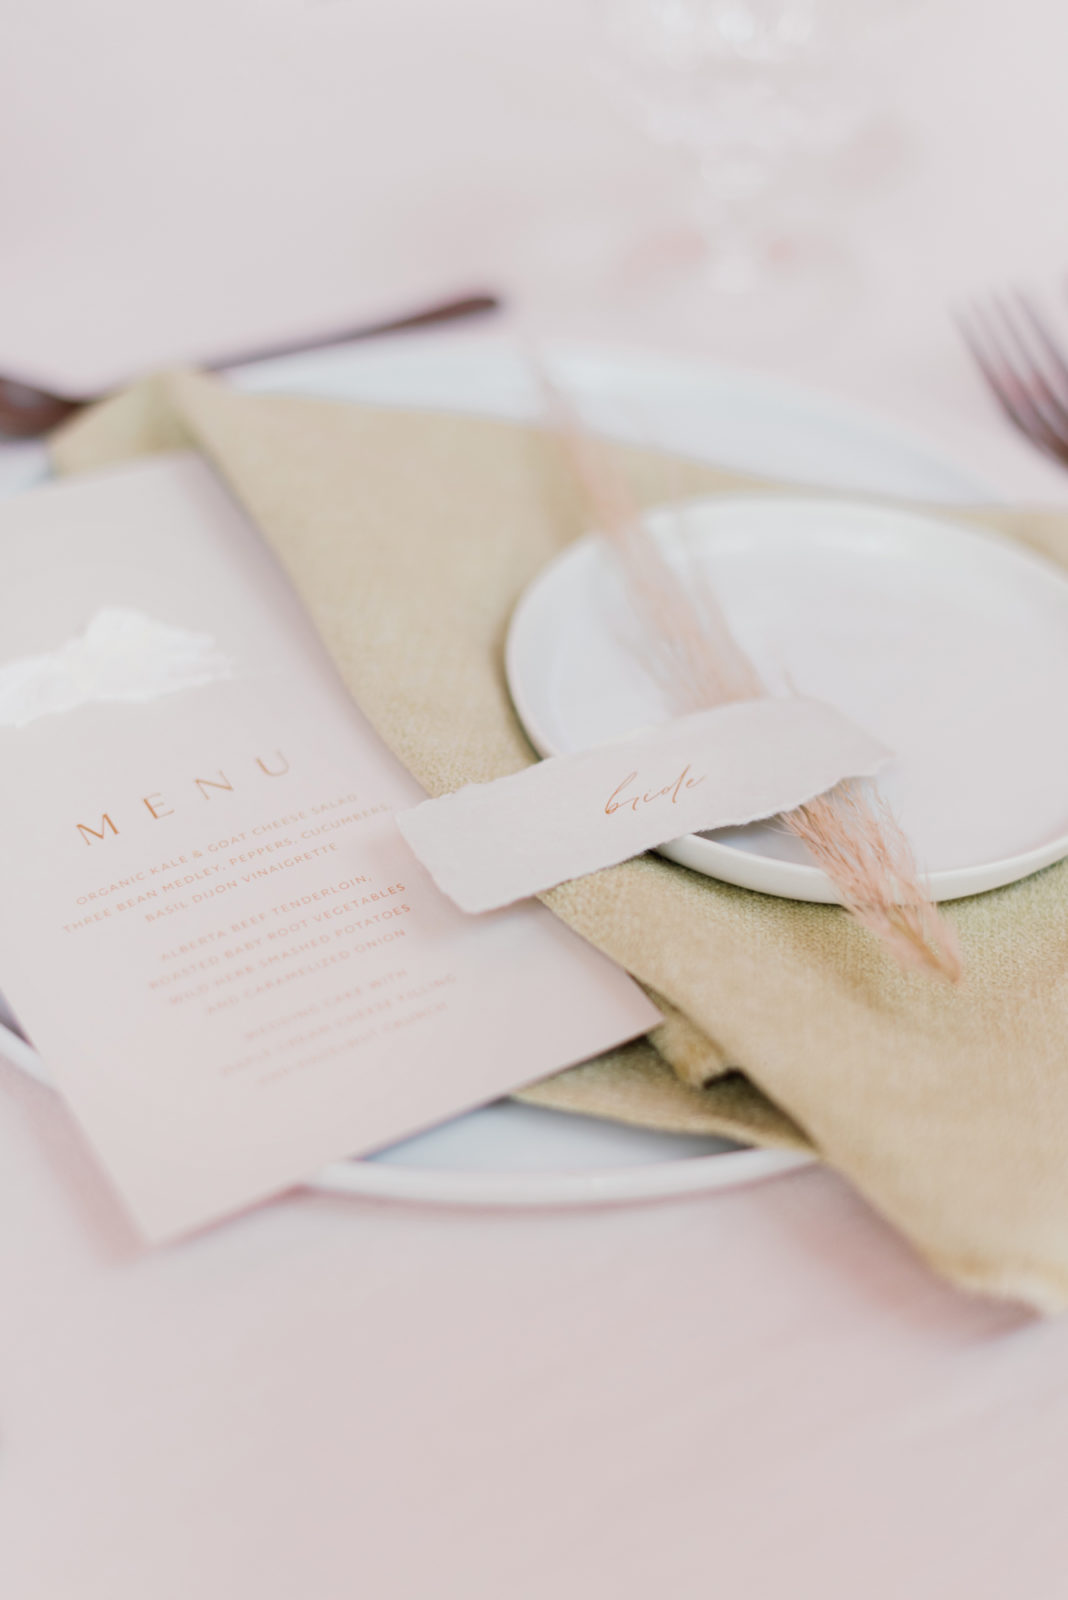 Beautiful and Unique Place Card Ideas That Will Add A Special Touch to Any Place Setting